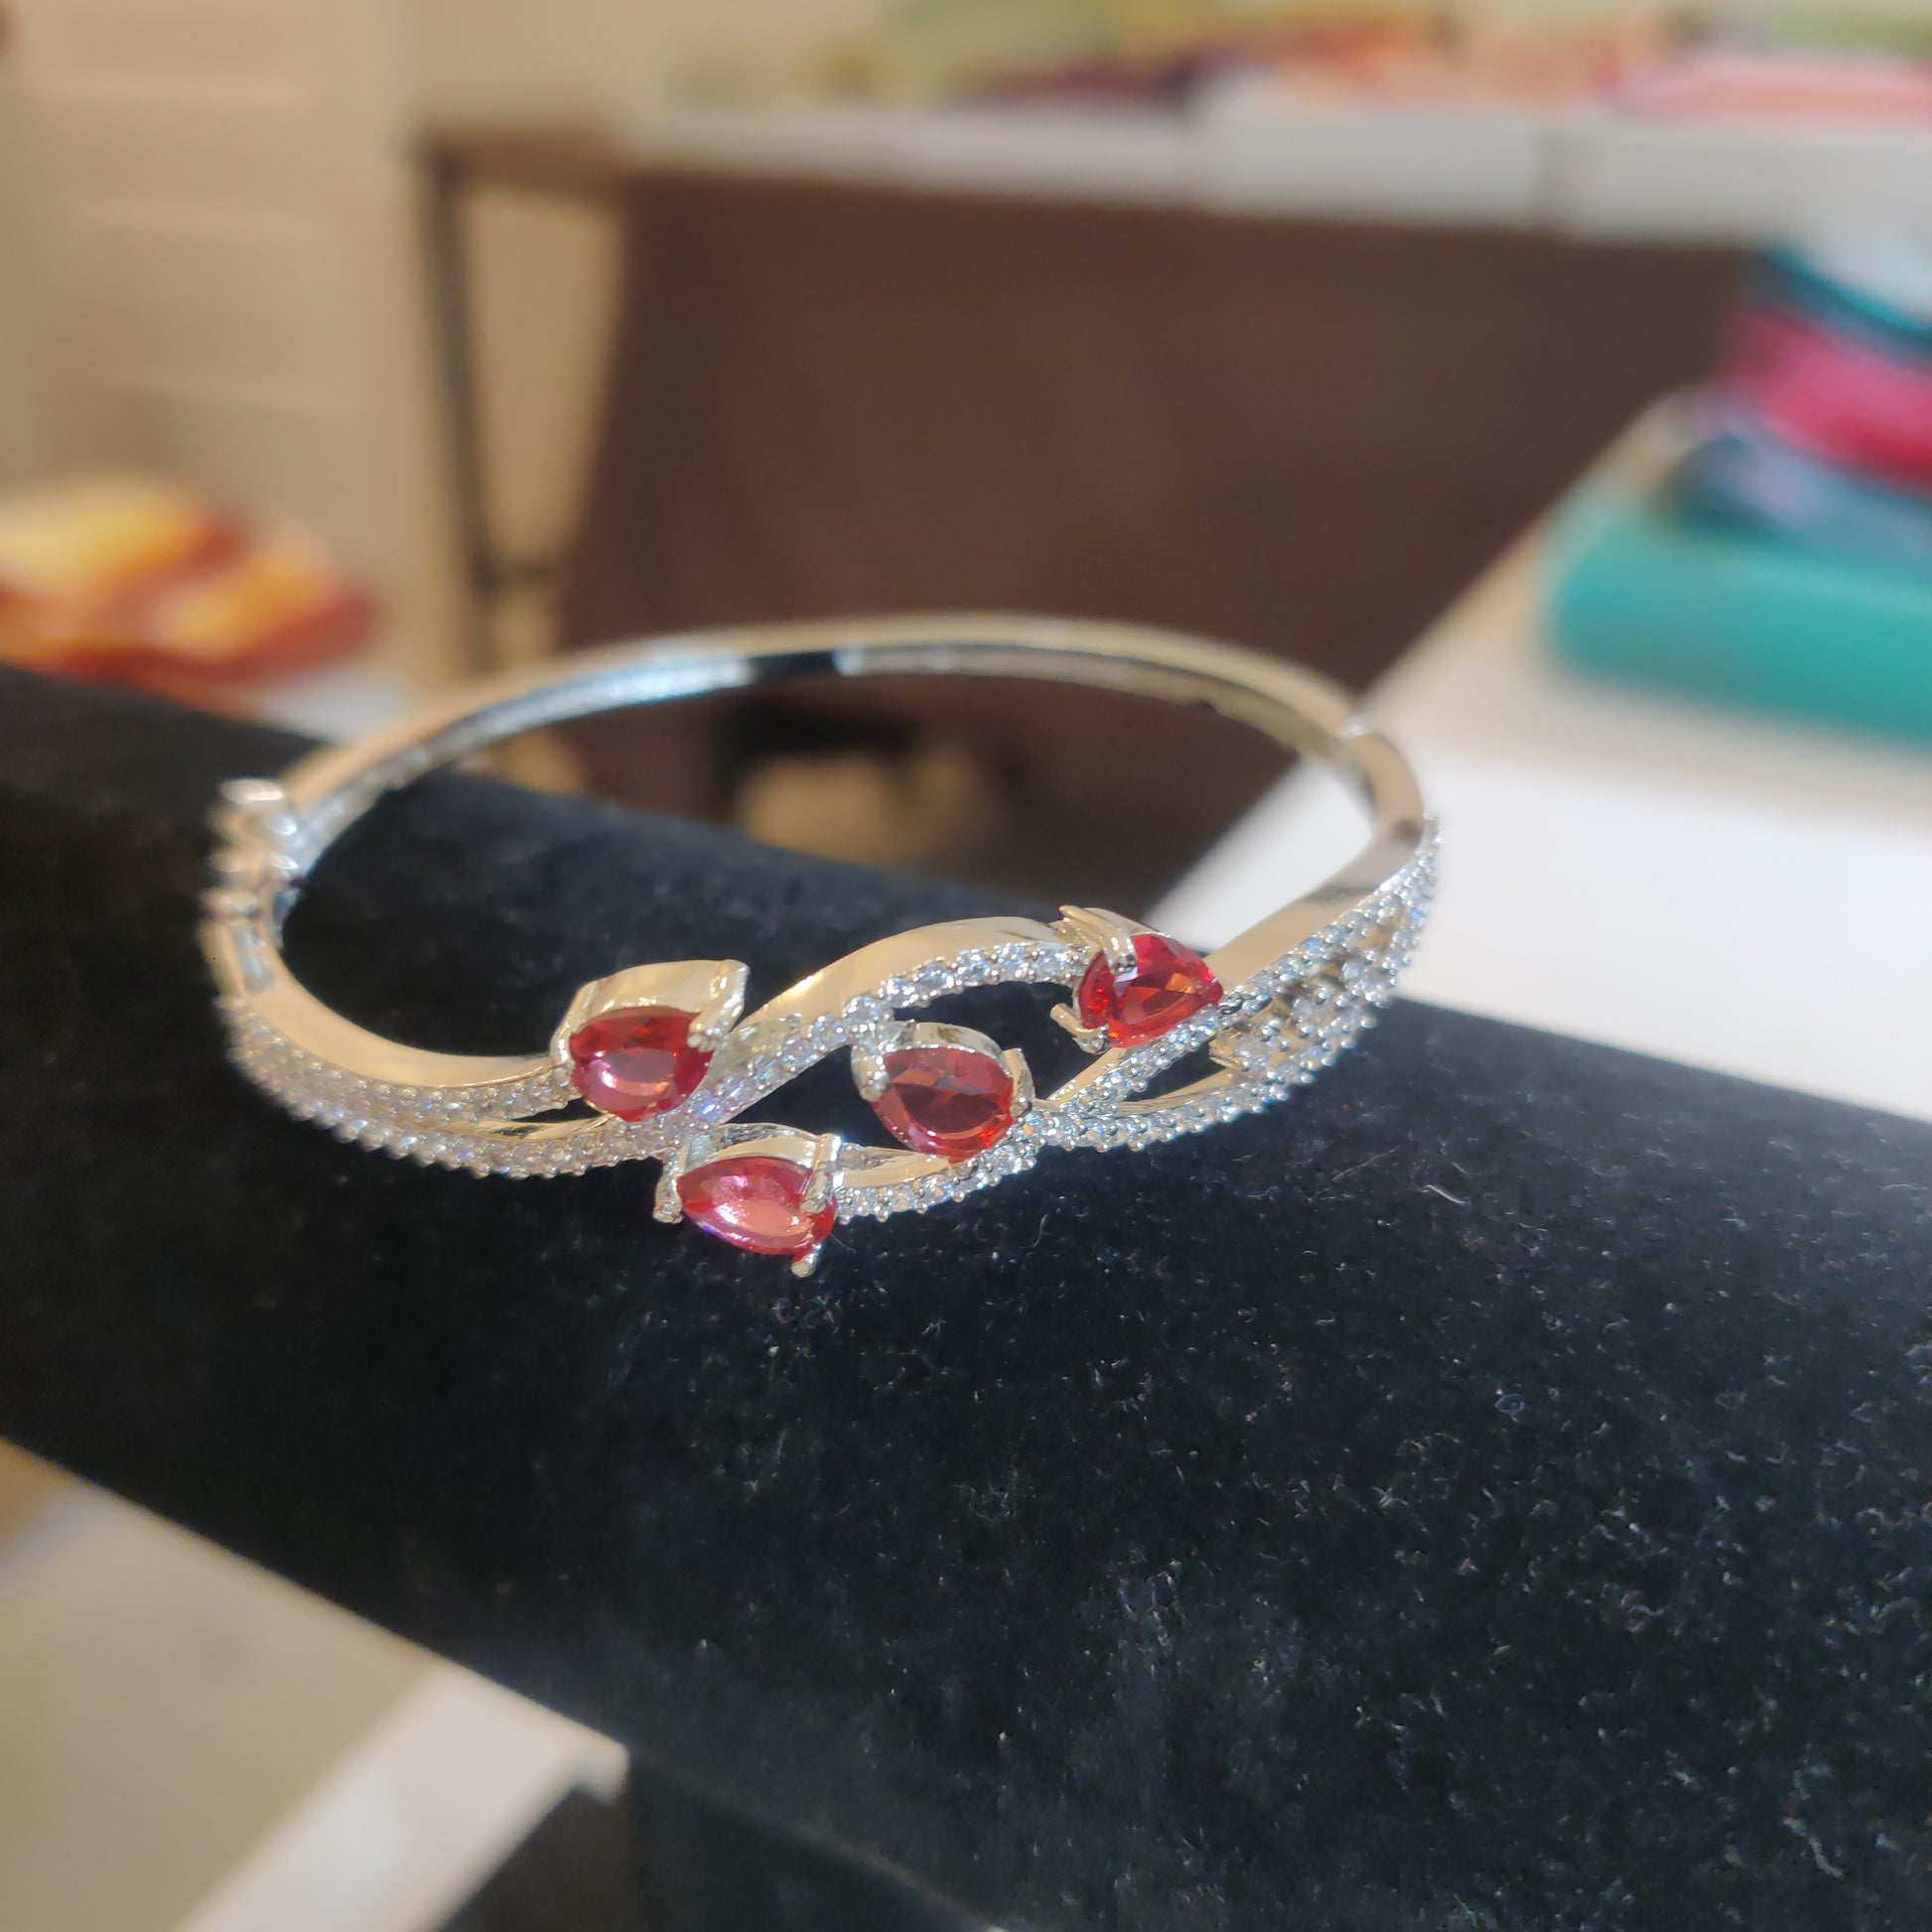 Beautiful AD Bracelet With Red Diamond Shaped Stones